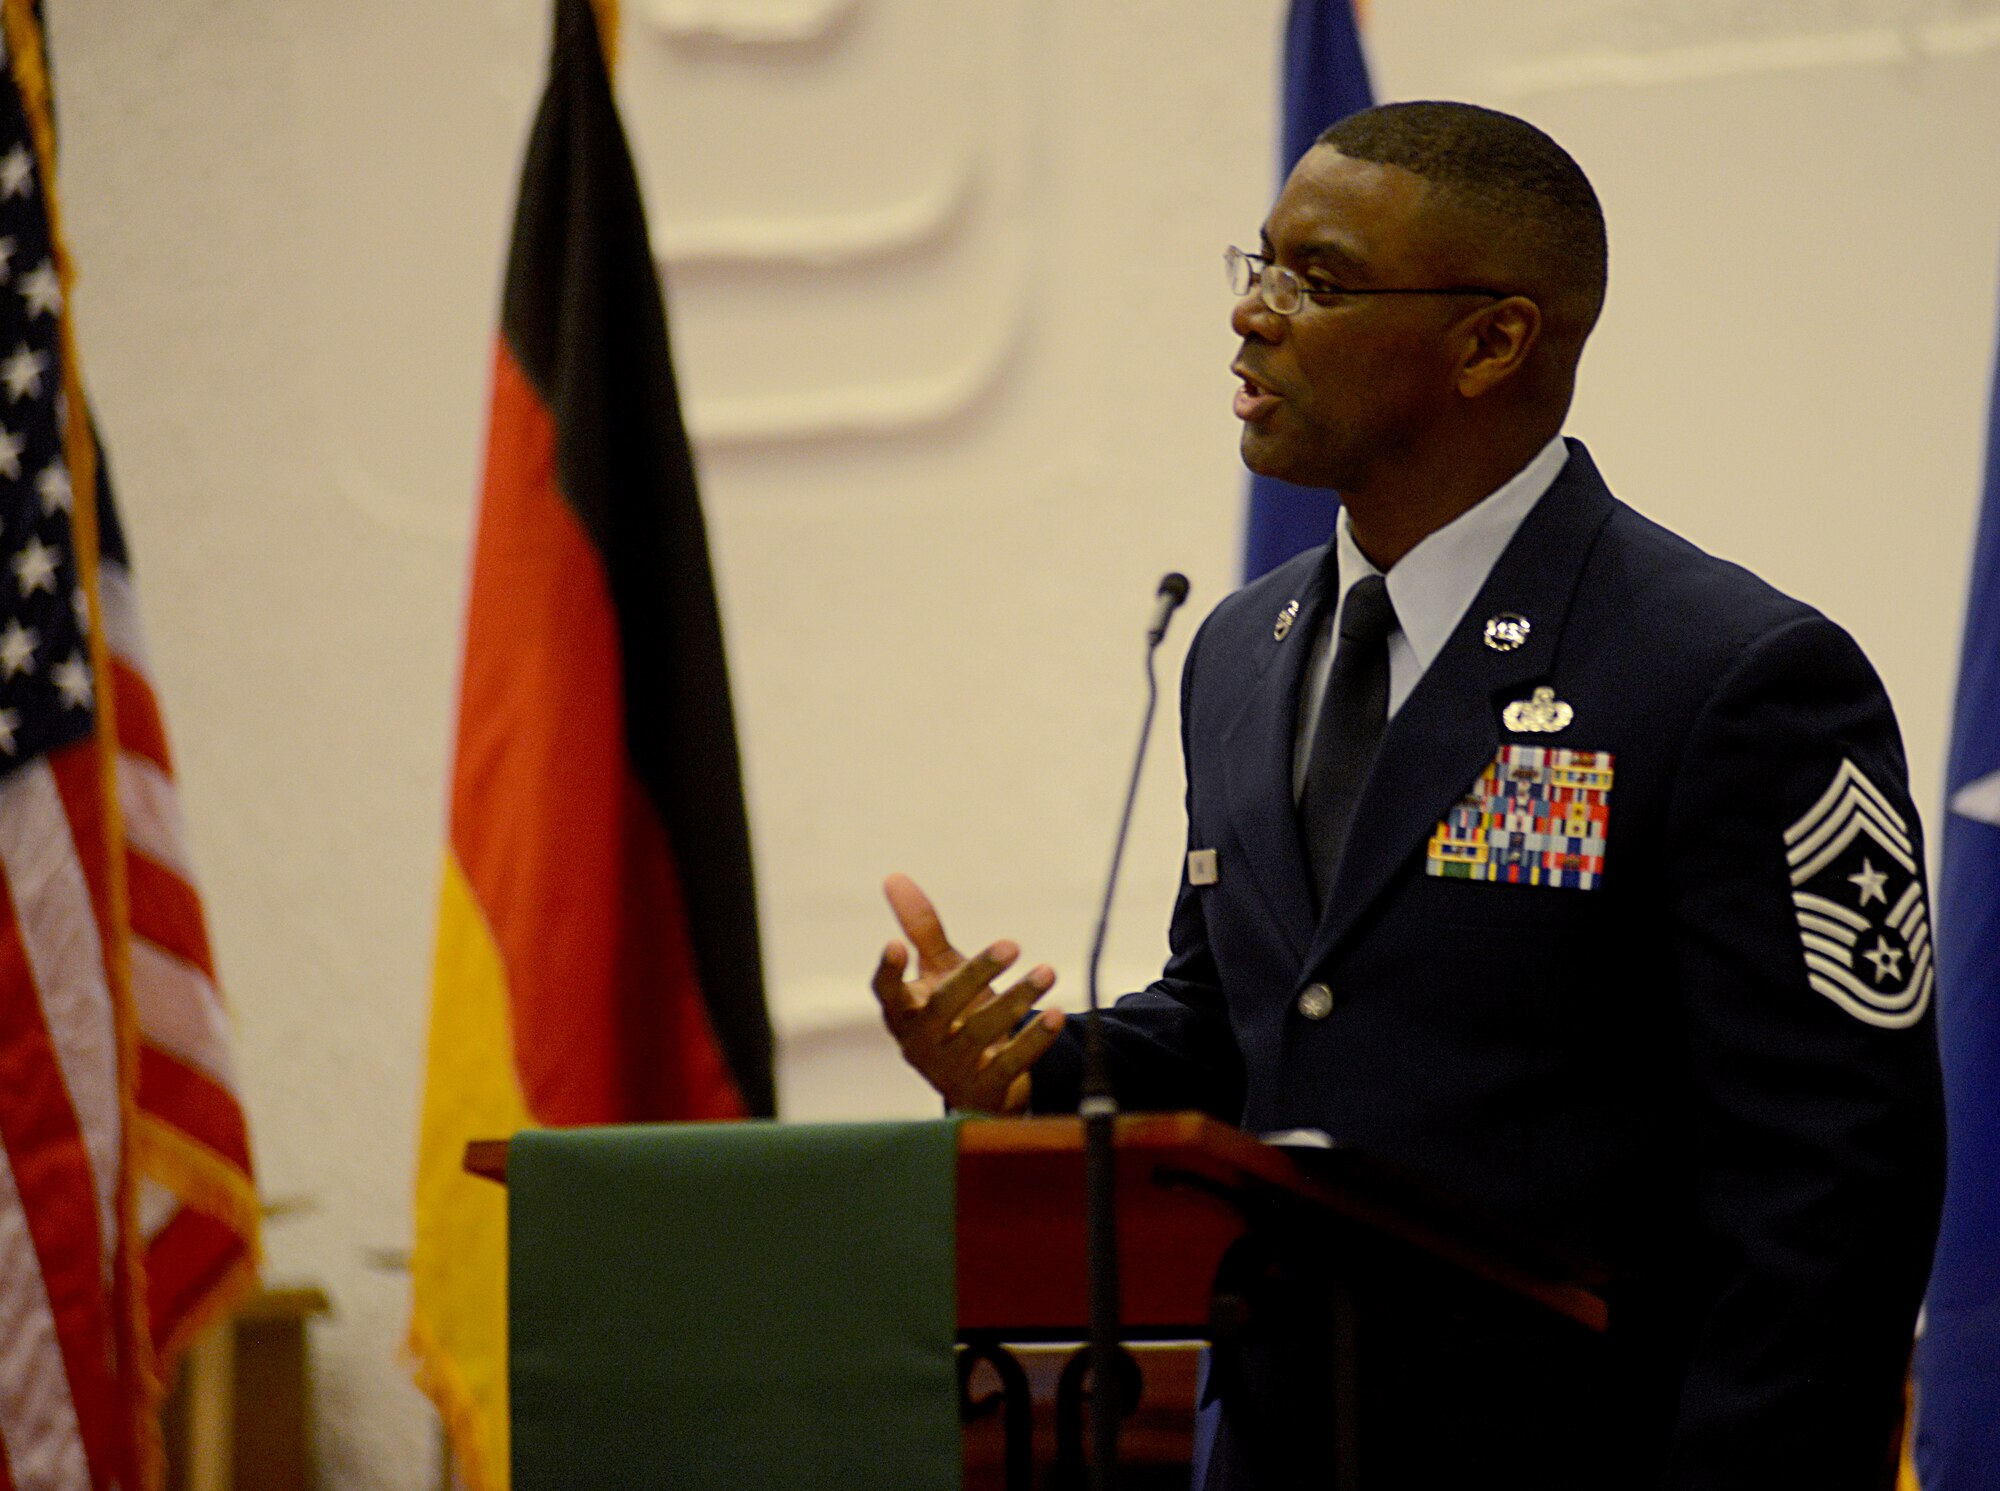 Chief Master Sgt. James E. Davis, U.S. Air Forces in Europe and Air Forces Africa command chief, speaks during a Martin Luther King Jr. observance ceremony Jan. 12, 2016, at Ramstein Air Base, Germany. As the guest speaker, Davis reflected on King’s dream of a better America as well as the importance of not being afraid to dream the “impossible.” (U.S. Air Force photo/Staff Sgt. Timothy Moore)